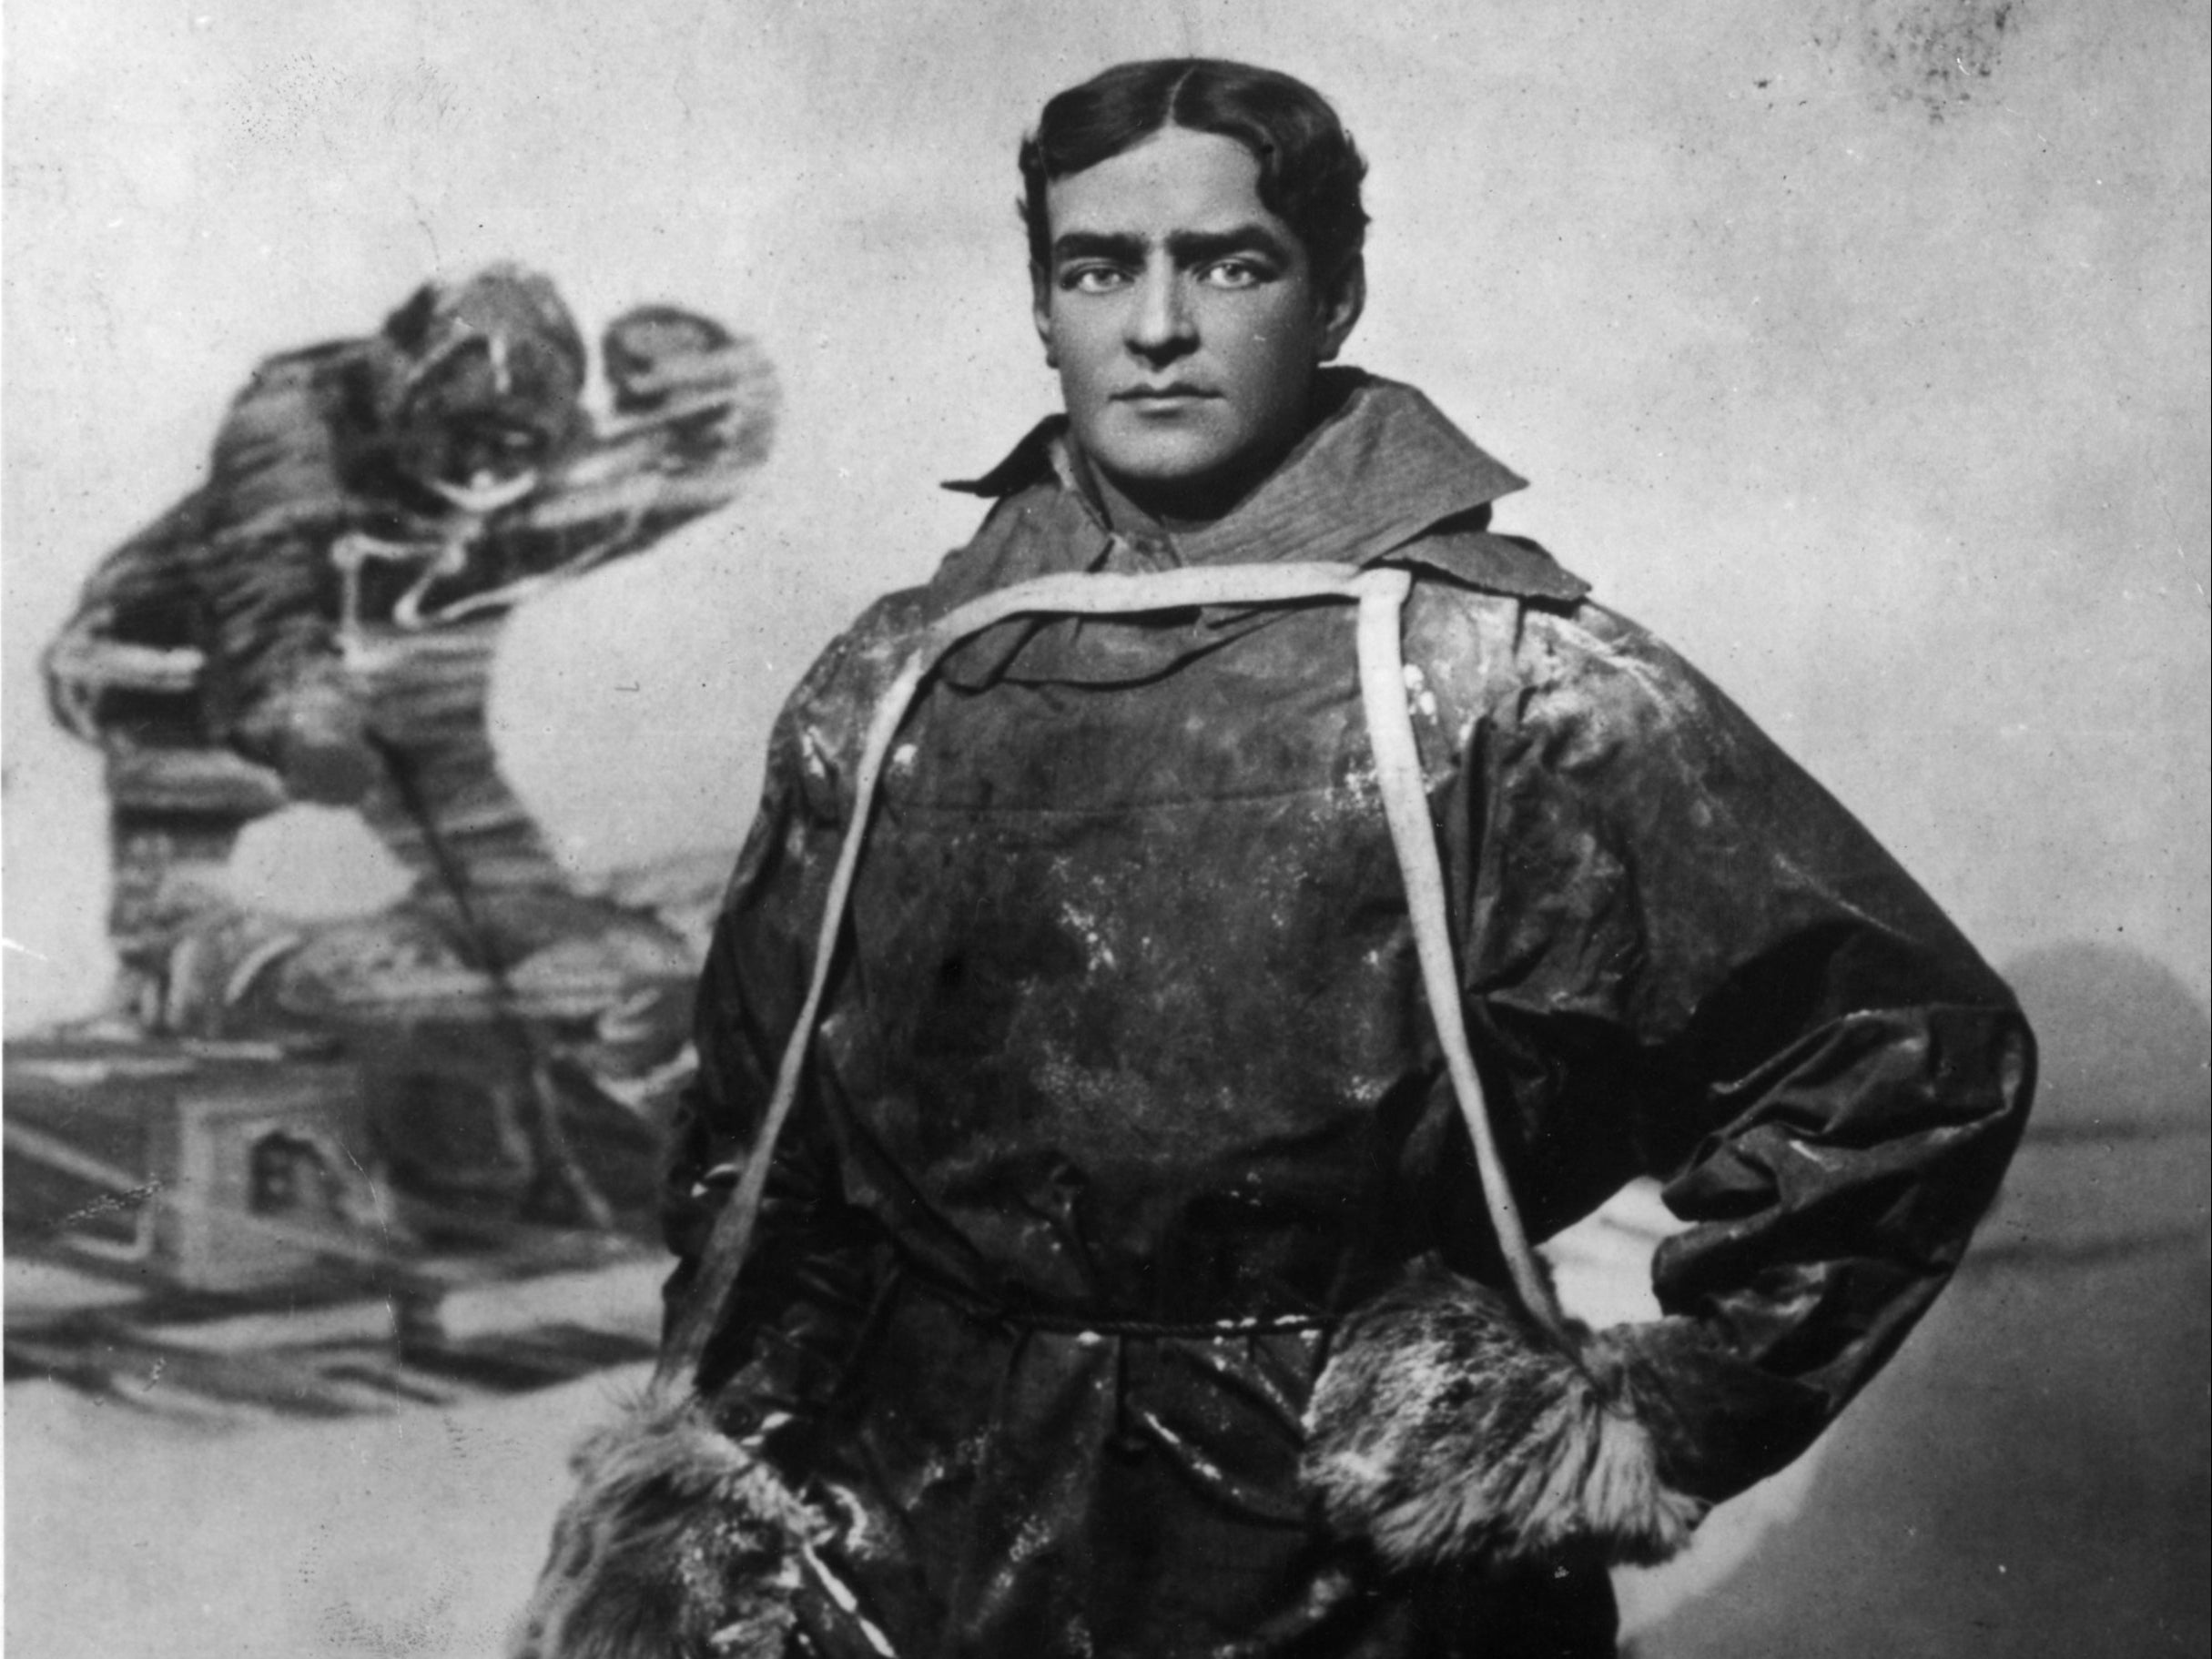 Shackleton led three expeditions to the Antarctic in the early 20th century